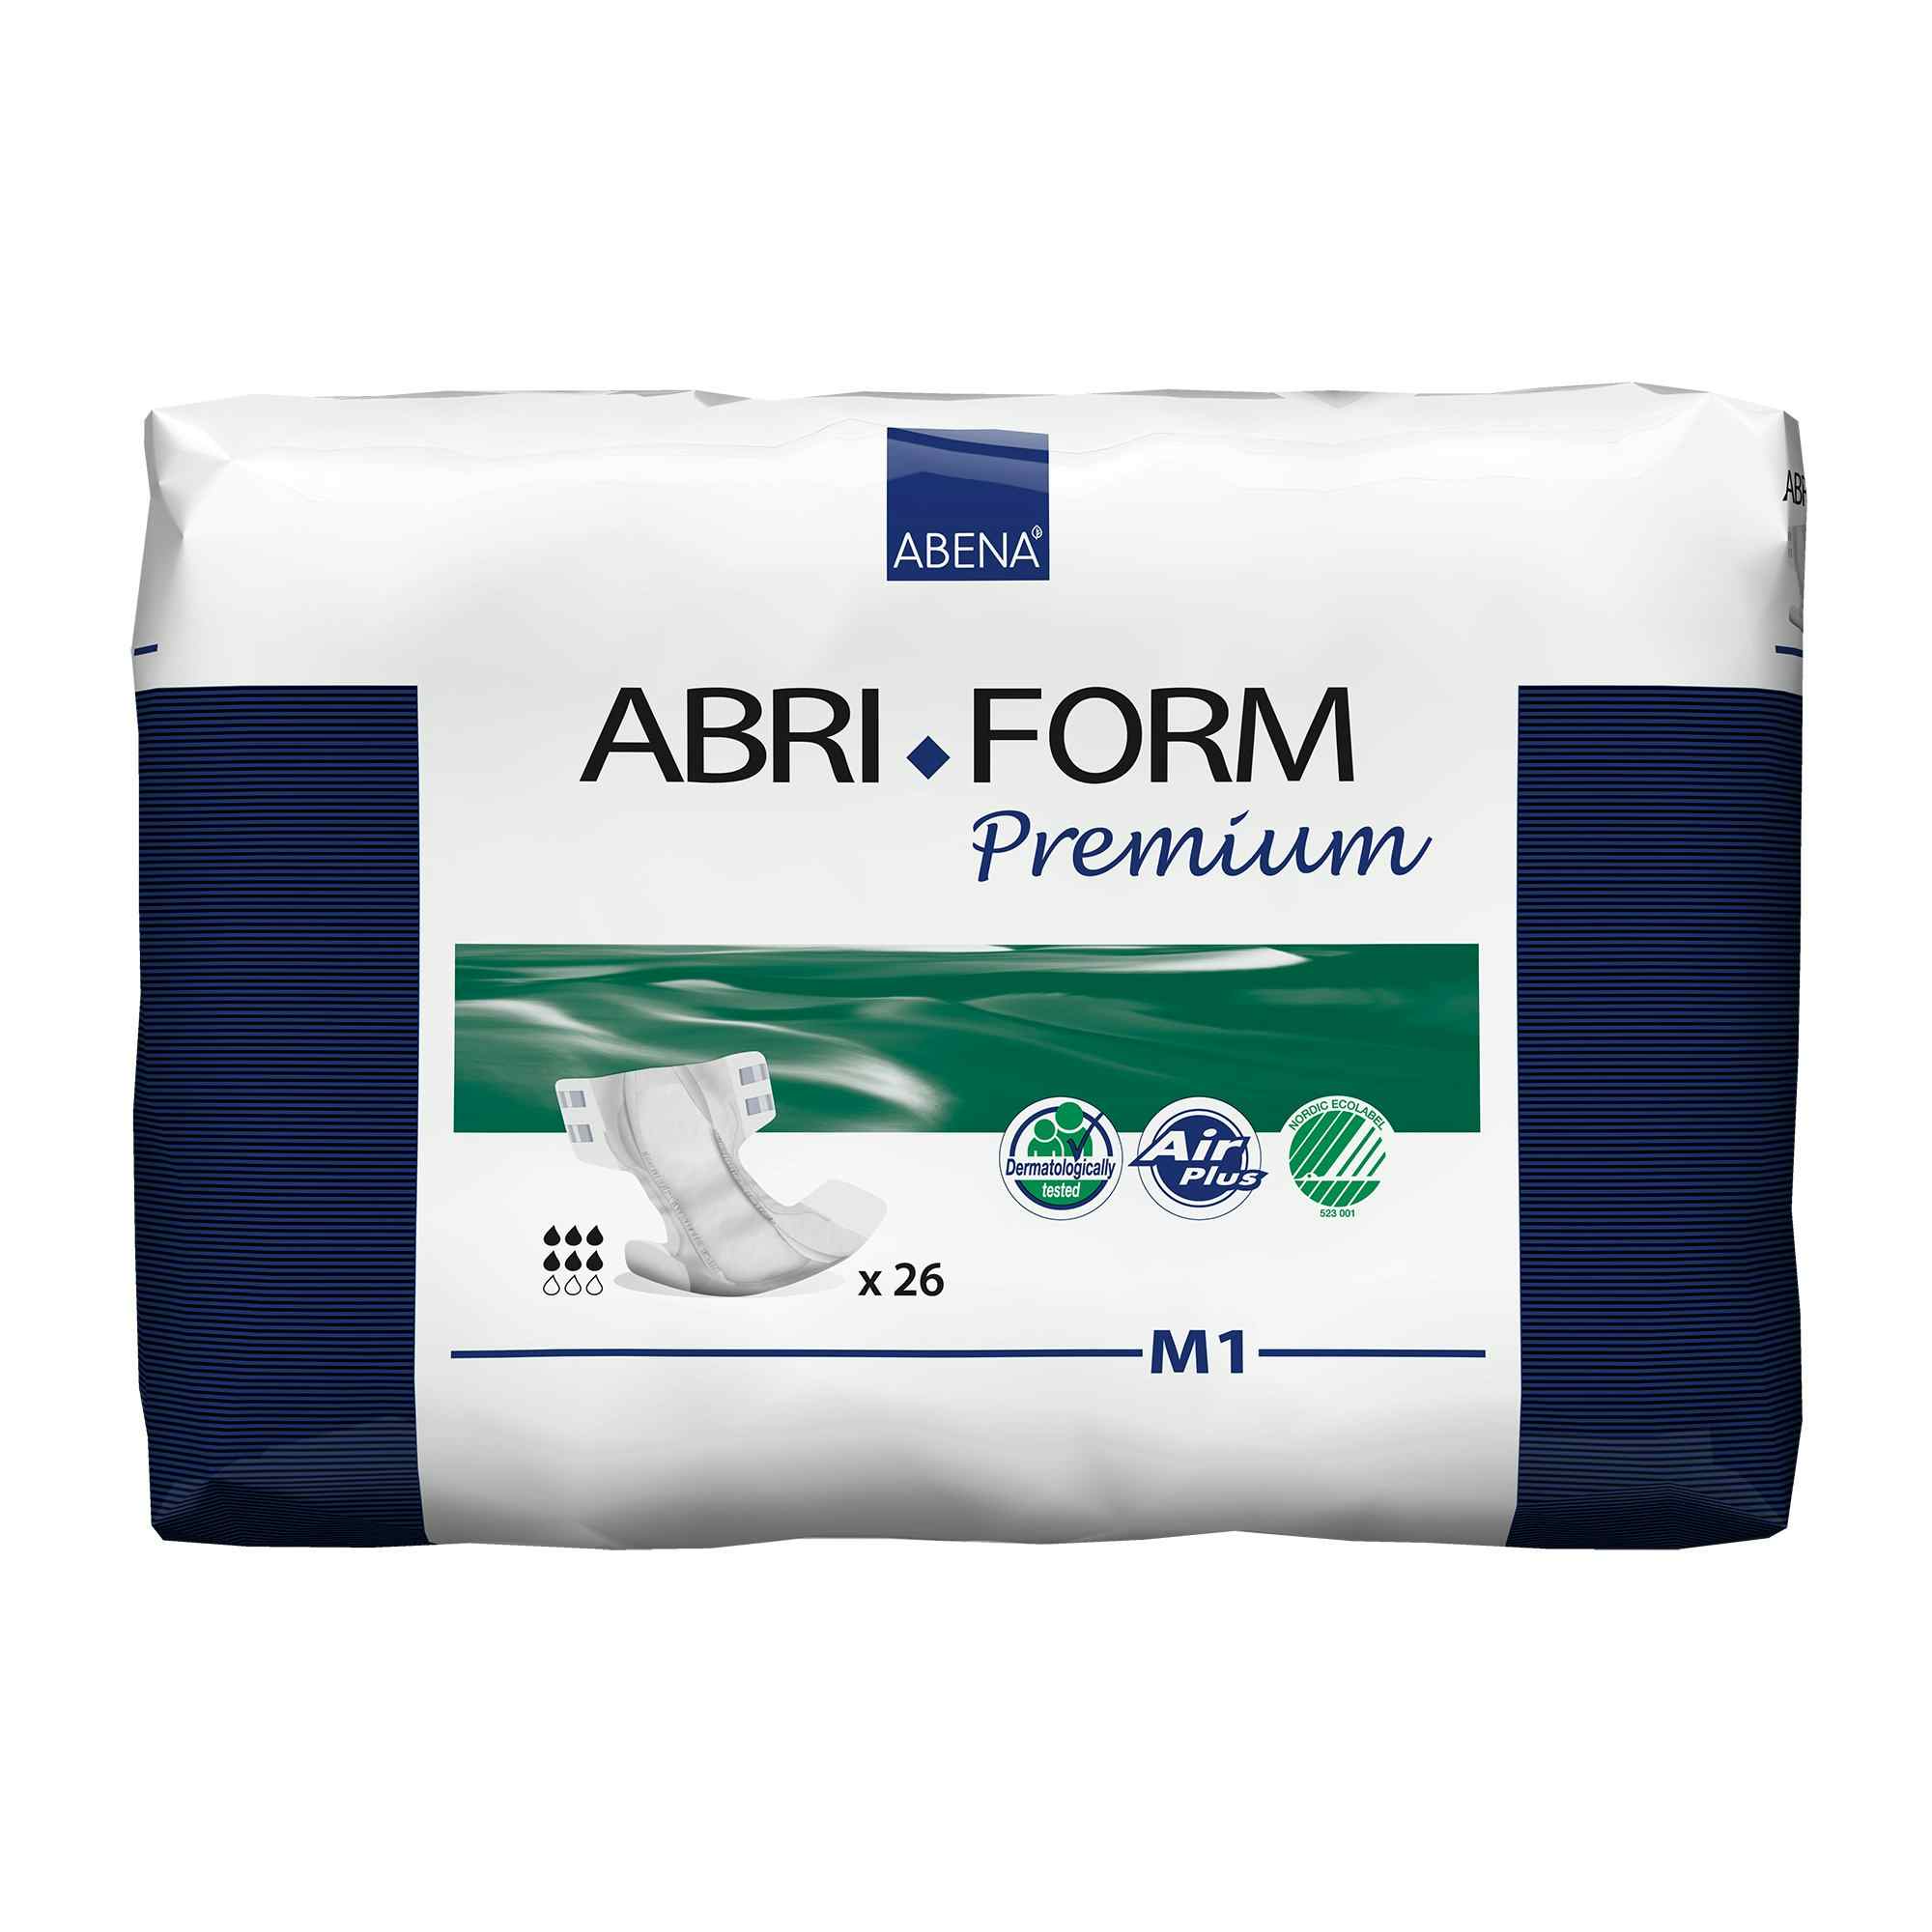 Abri-Form Premium M1 Unisex Adult Disposable Diaper with tabs, Moderate Absorbency, 43061, Medium (28-44") - Bag of 26